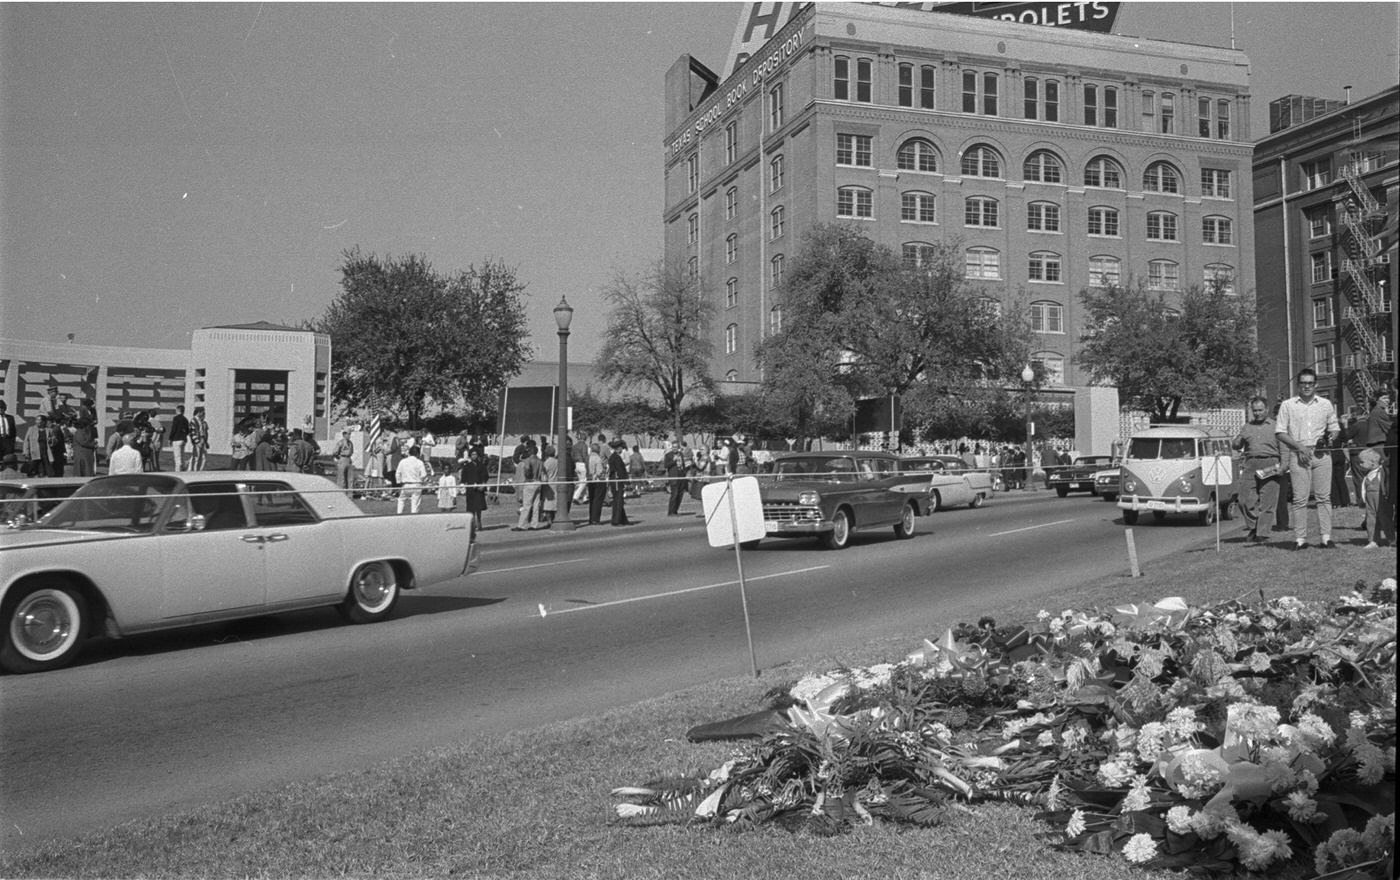 Dealey Plaza, Dallas, Texas, showing area near Texas State Book Depository building following President John F. Kennedy's assassination, 1963